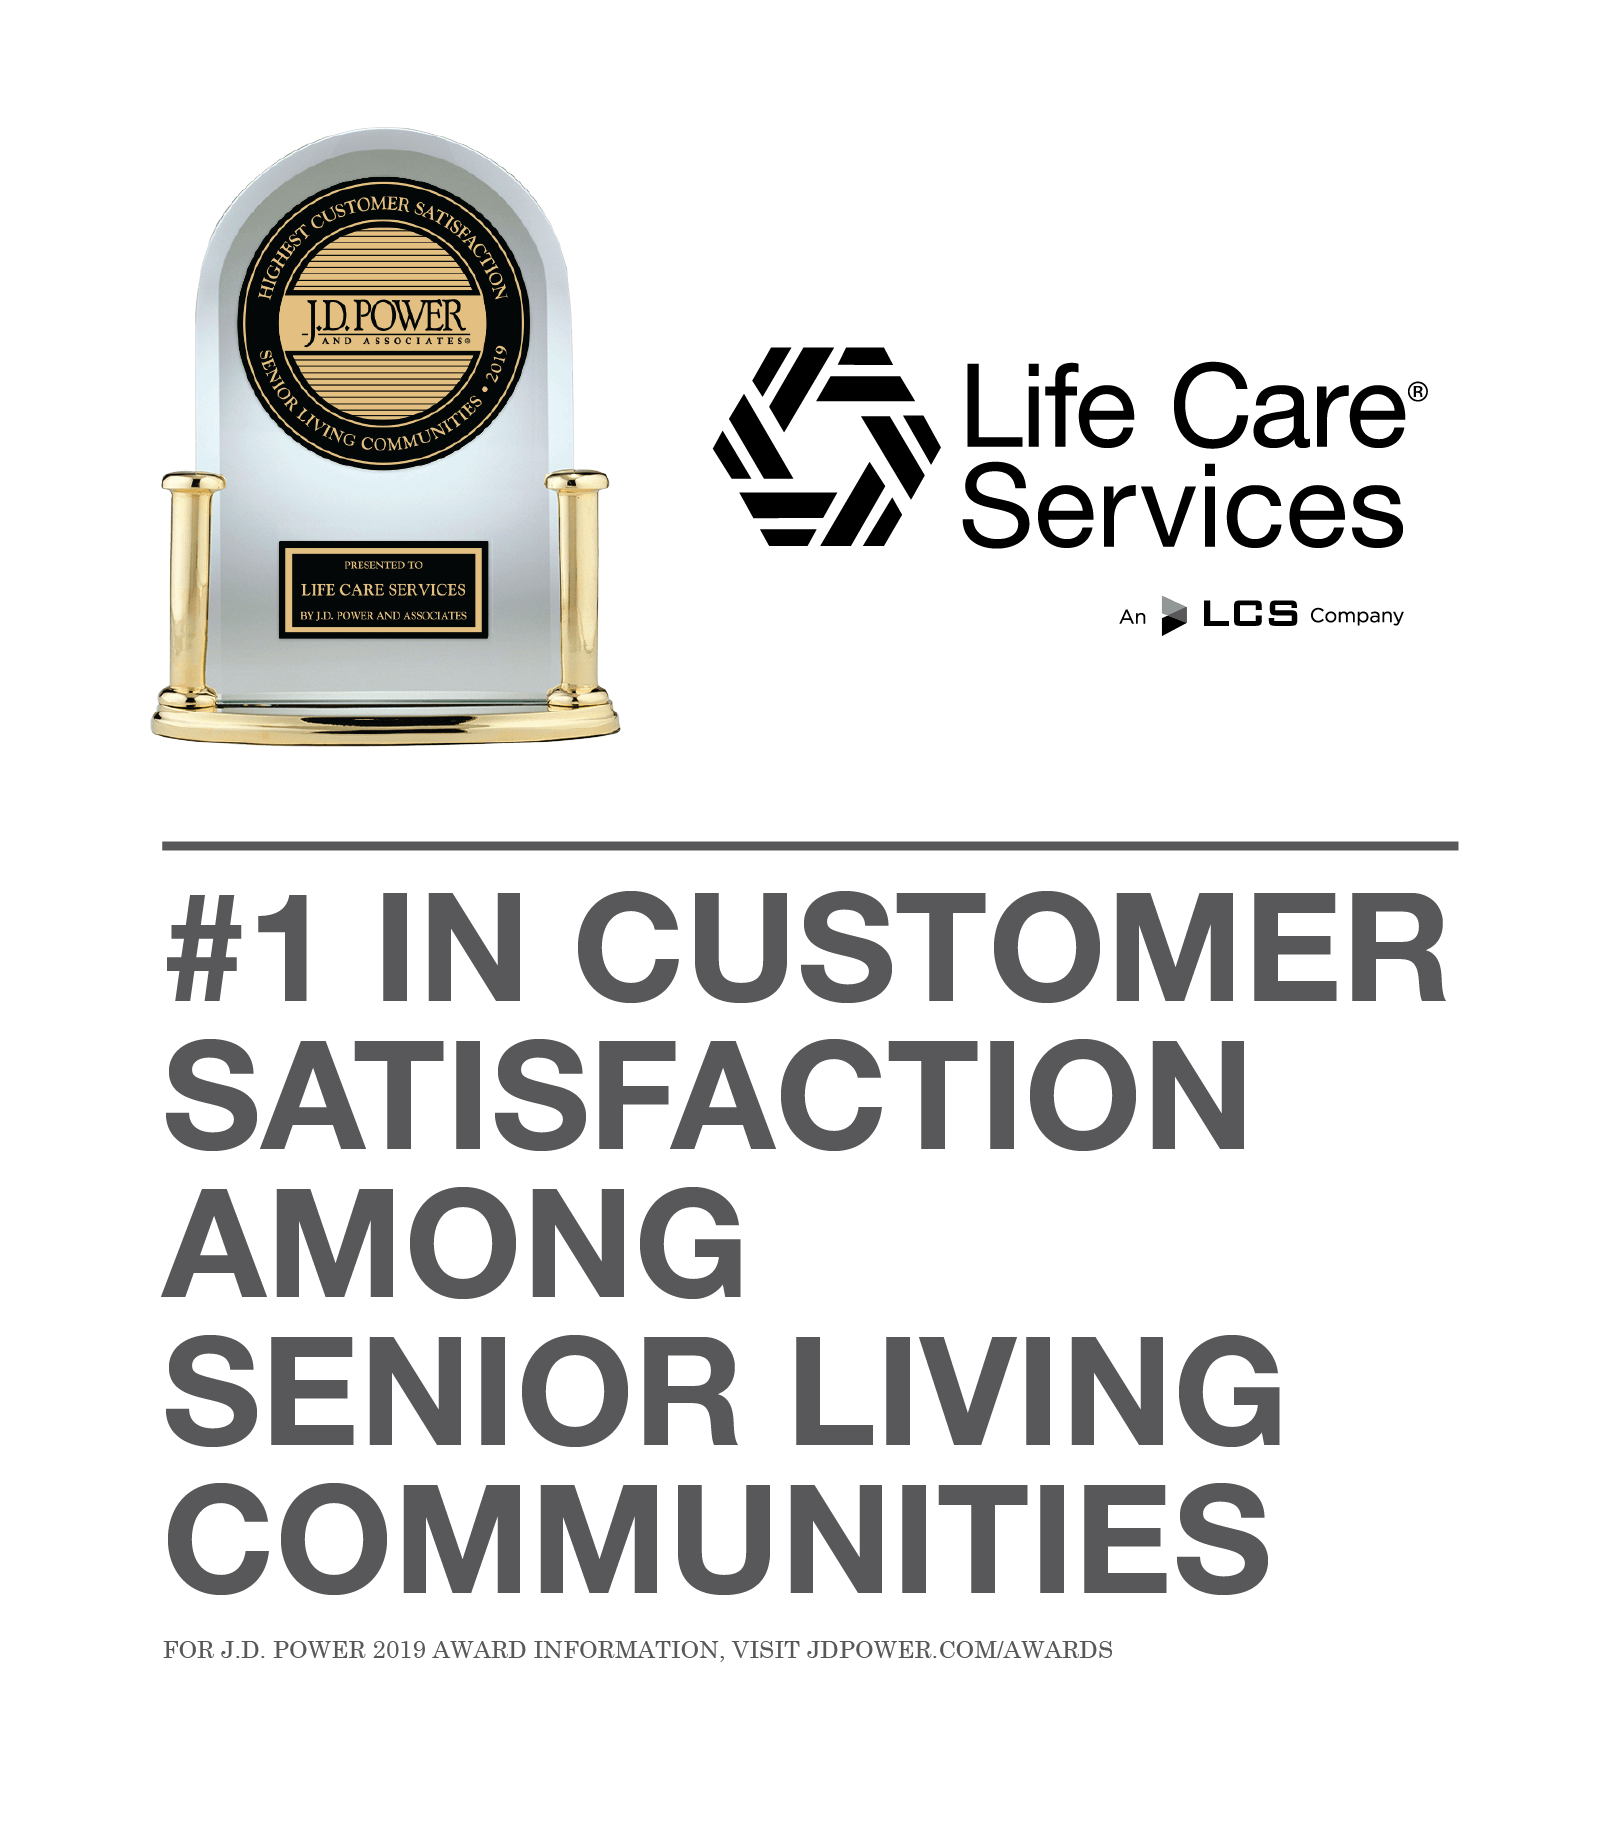 JD Power Award for #1 in Customer Satisfaction Among Senior Living Communities given to Life Care Services